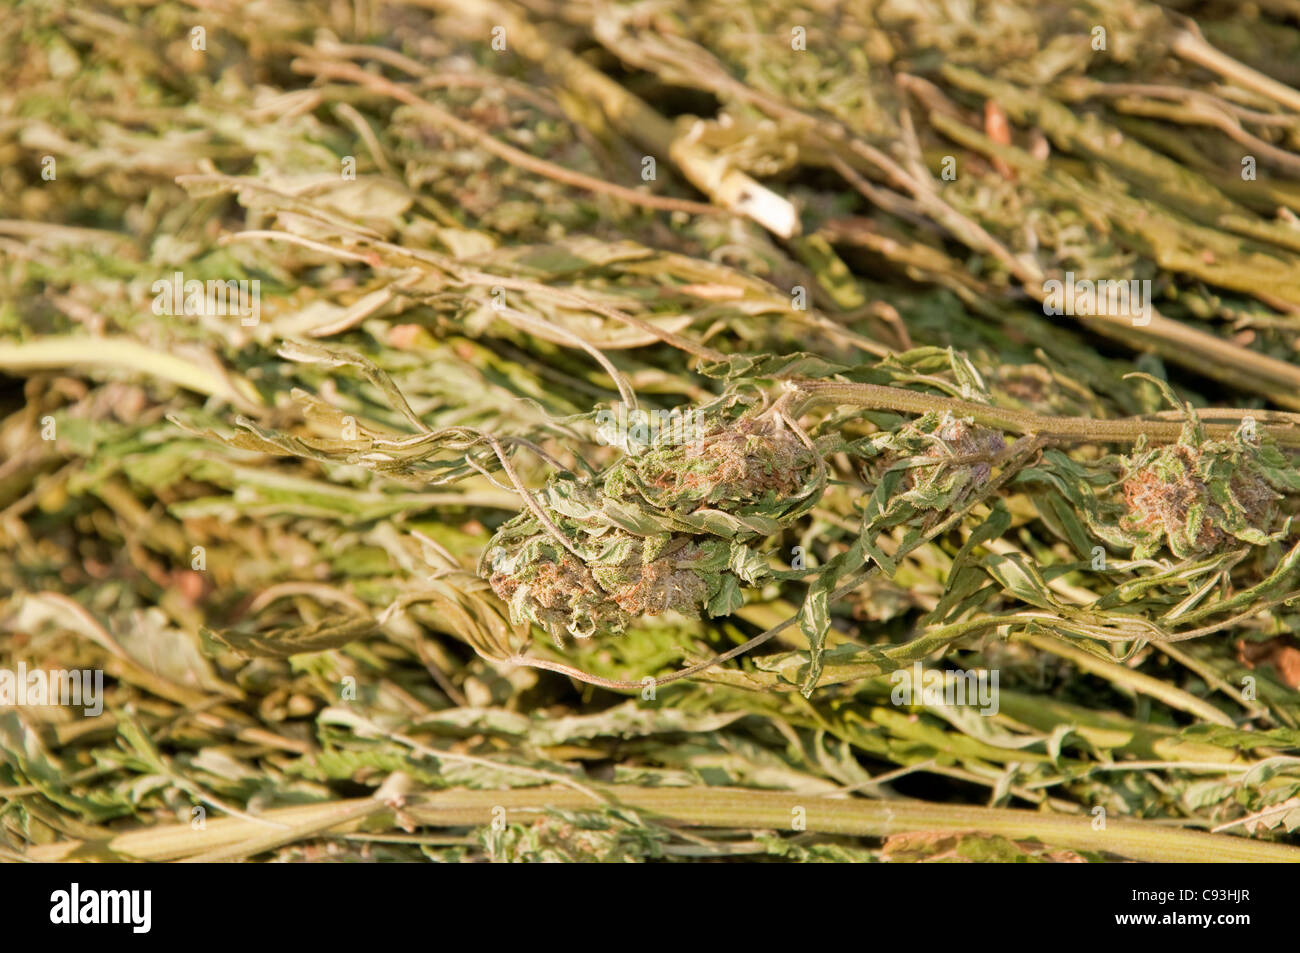 Close up image of a large bundle of marijuana confiscated by law enforcement Stock Photo